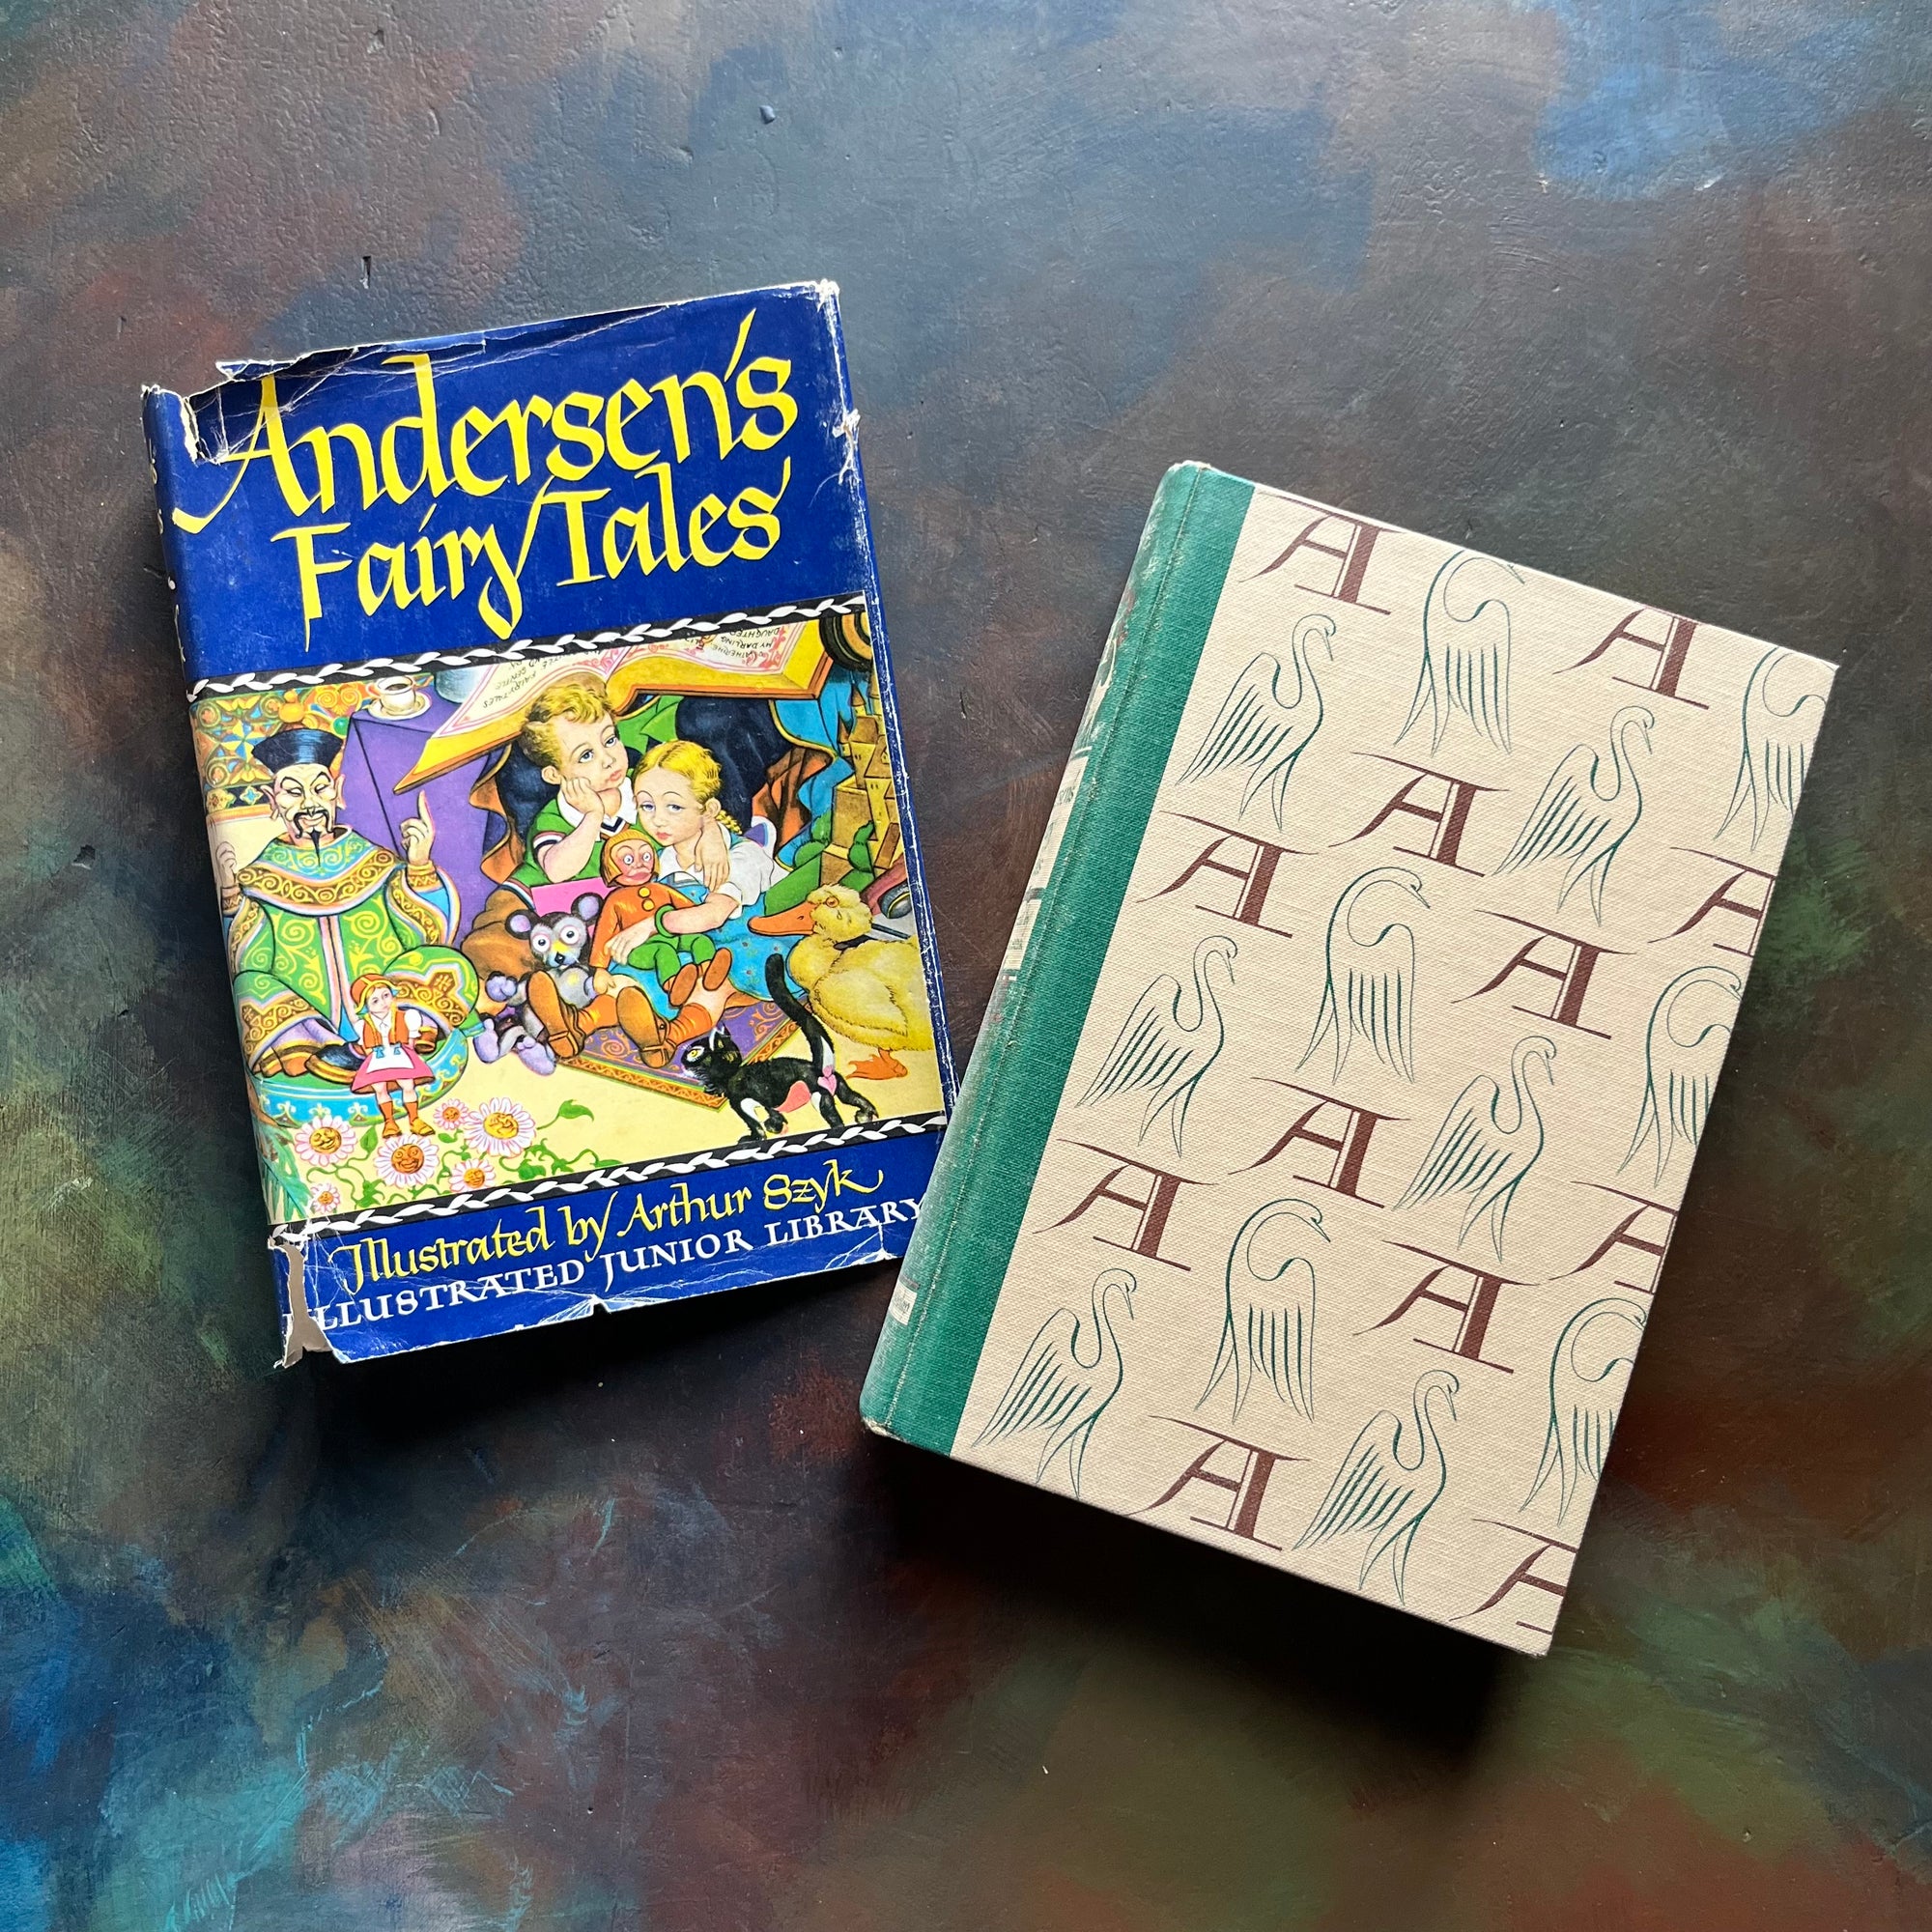 Andersen's Fairy Tales-vintage children's fairy tales & classics-Illustrated Junior Deluxe Editions-view of the front cover with an A and a bird in a repeating pattern